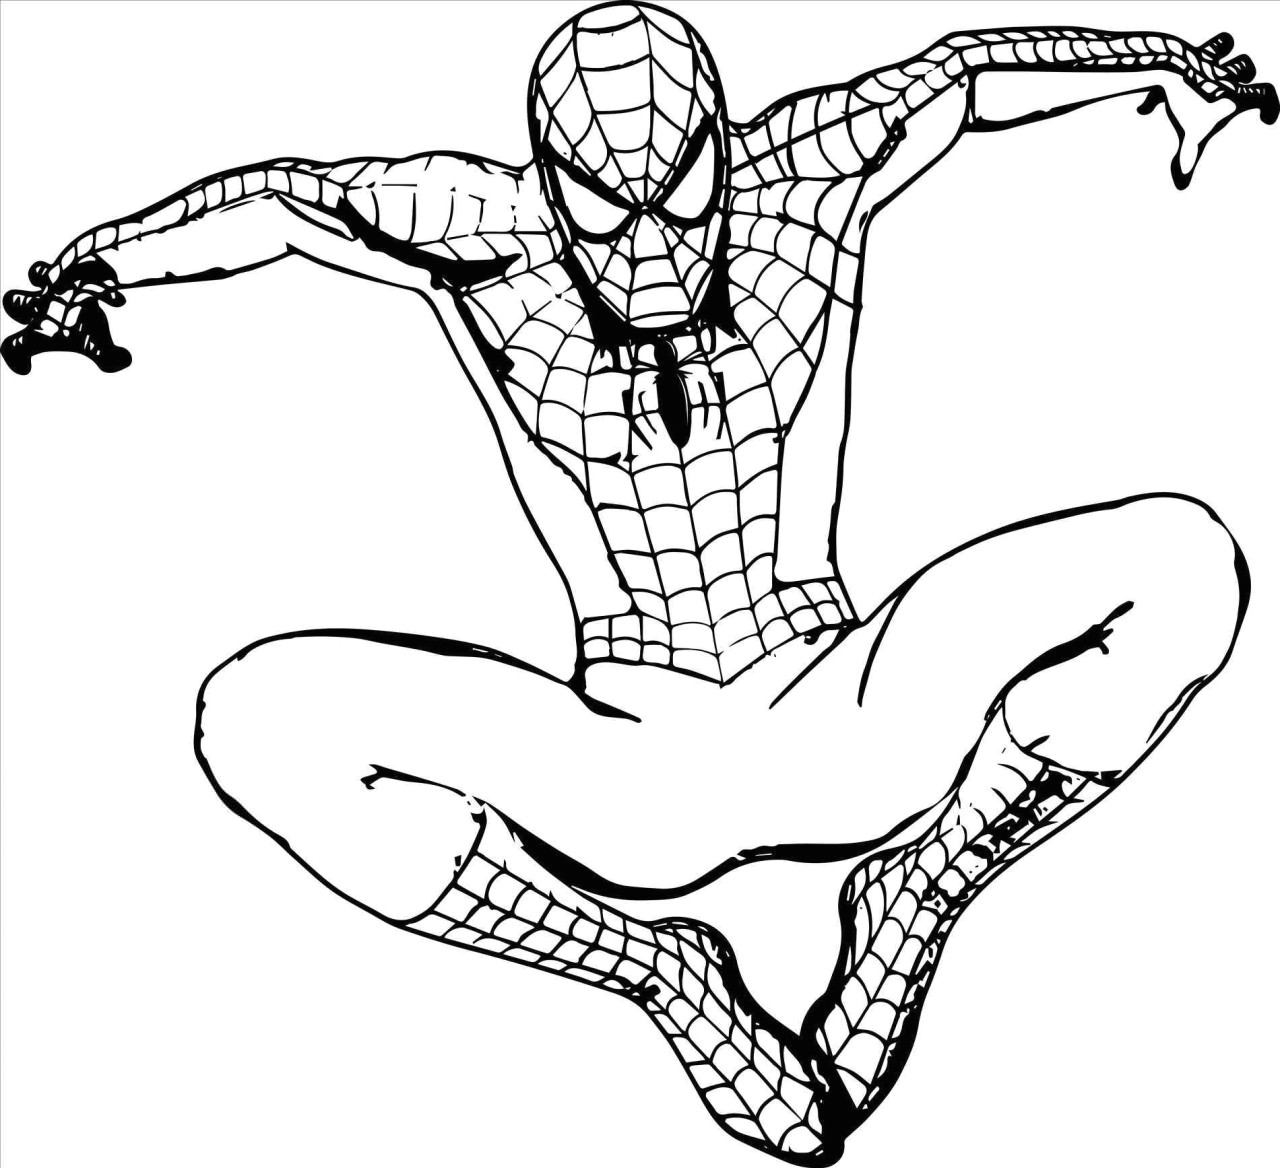 drawing for beginners superheroes easy to draw spiderman coloring pages luxury 0 0d